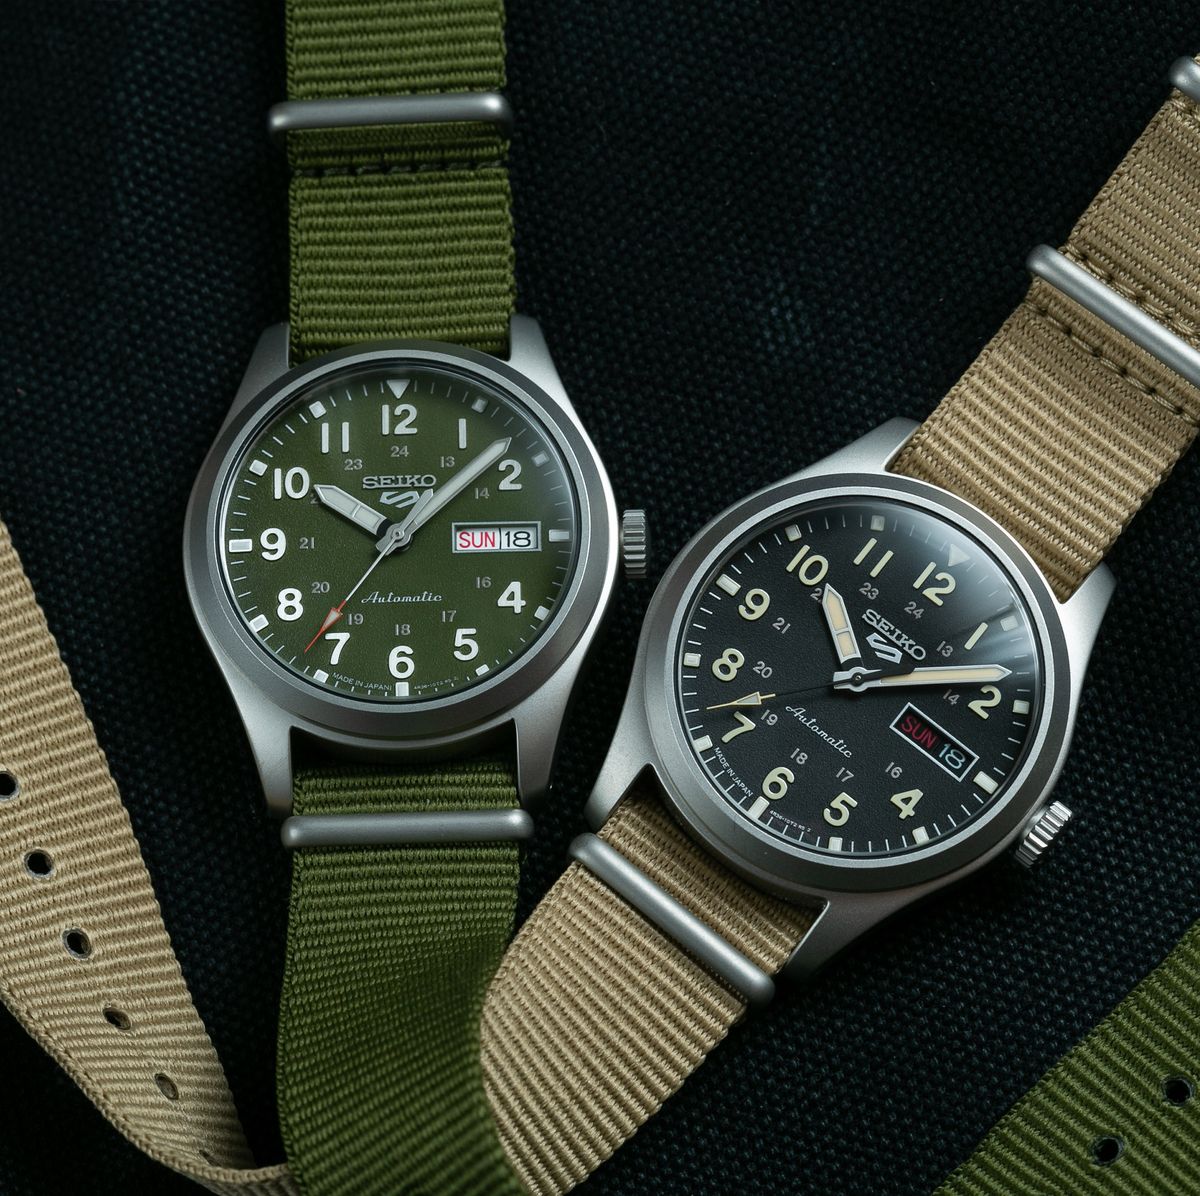 Seiko Sports Field Watch Review: It Live Up Its Lineage?